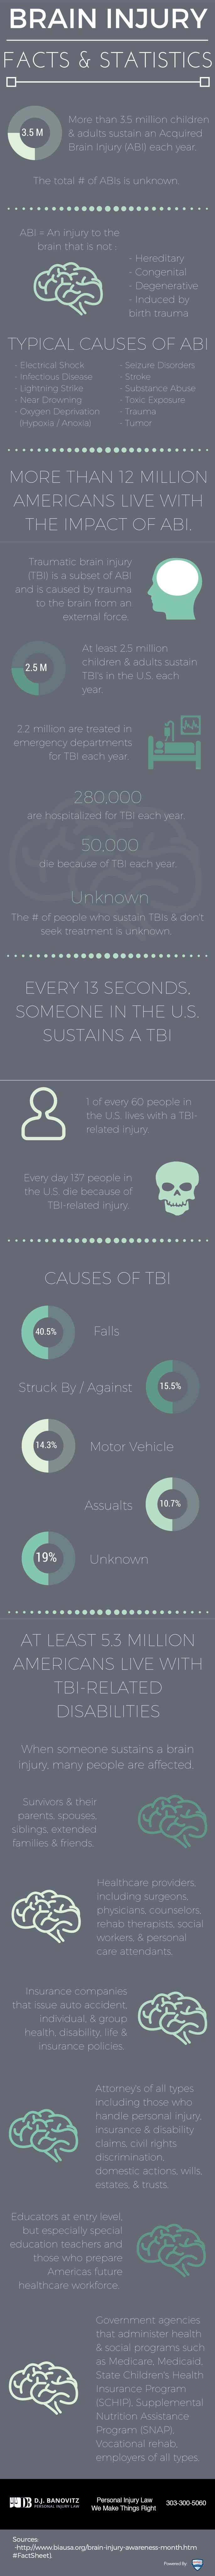 Traumatic Brain Injuries: The Prevalence, Causes & Impacts [Infographic]